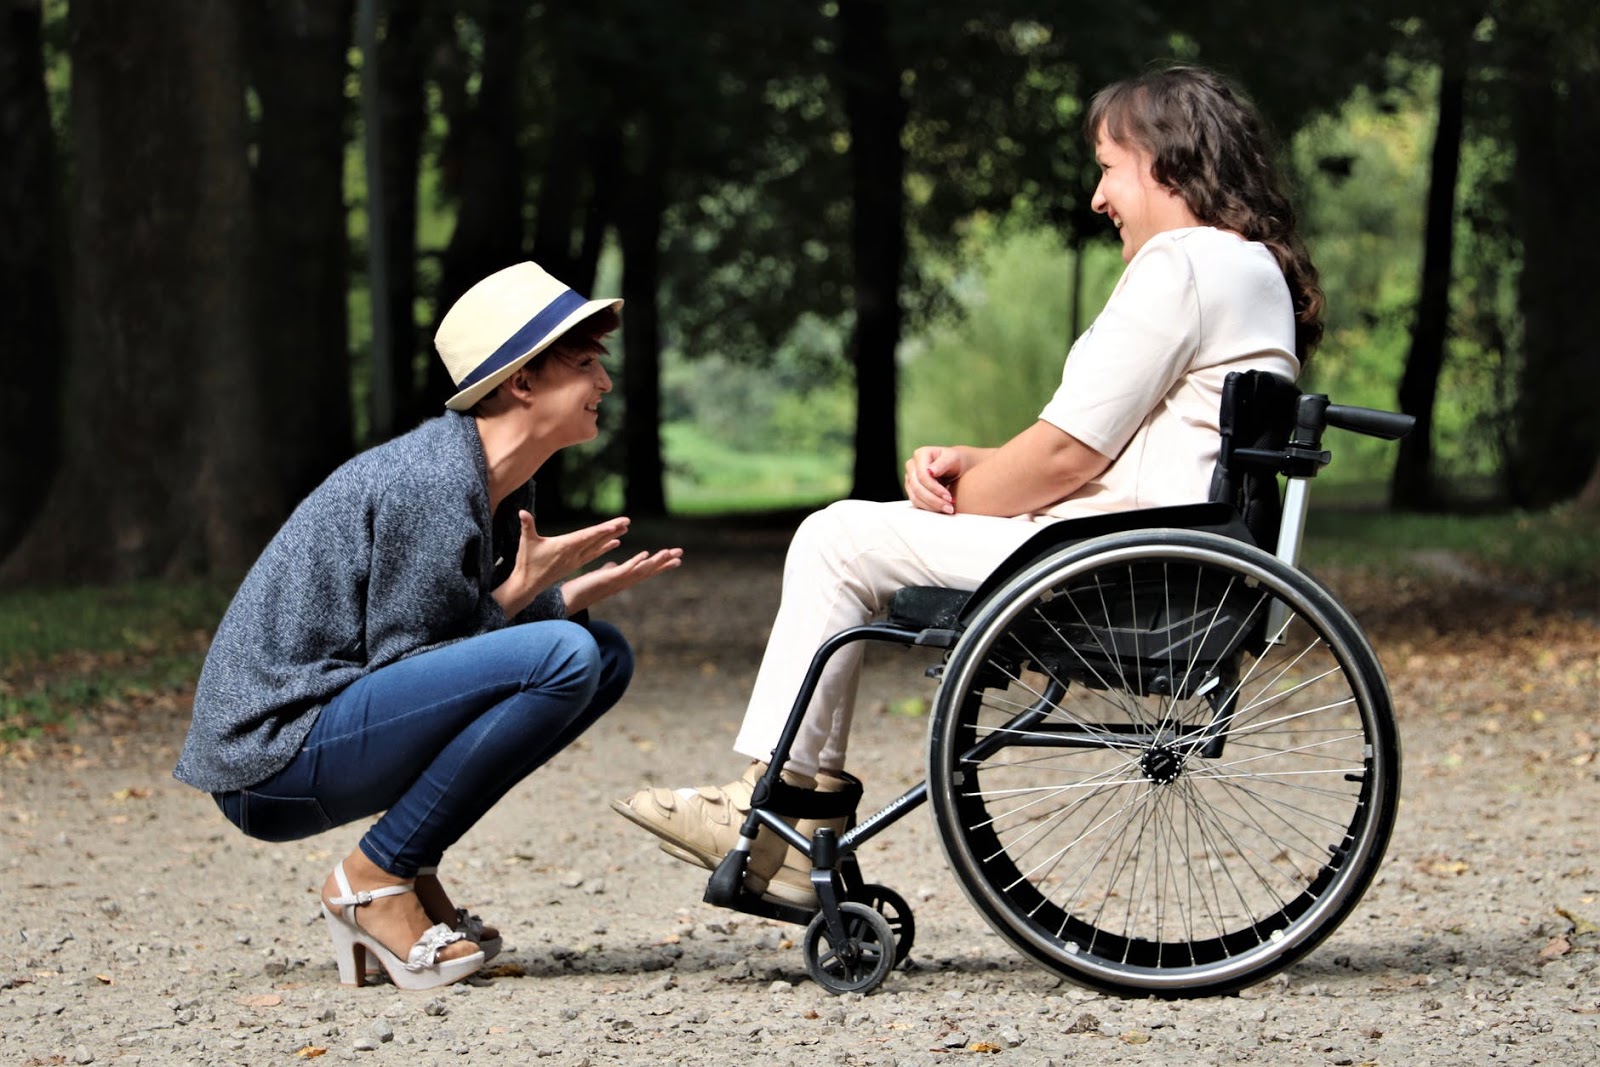 How to Know if You Qualify for Social Security Disability Benefits